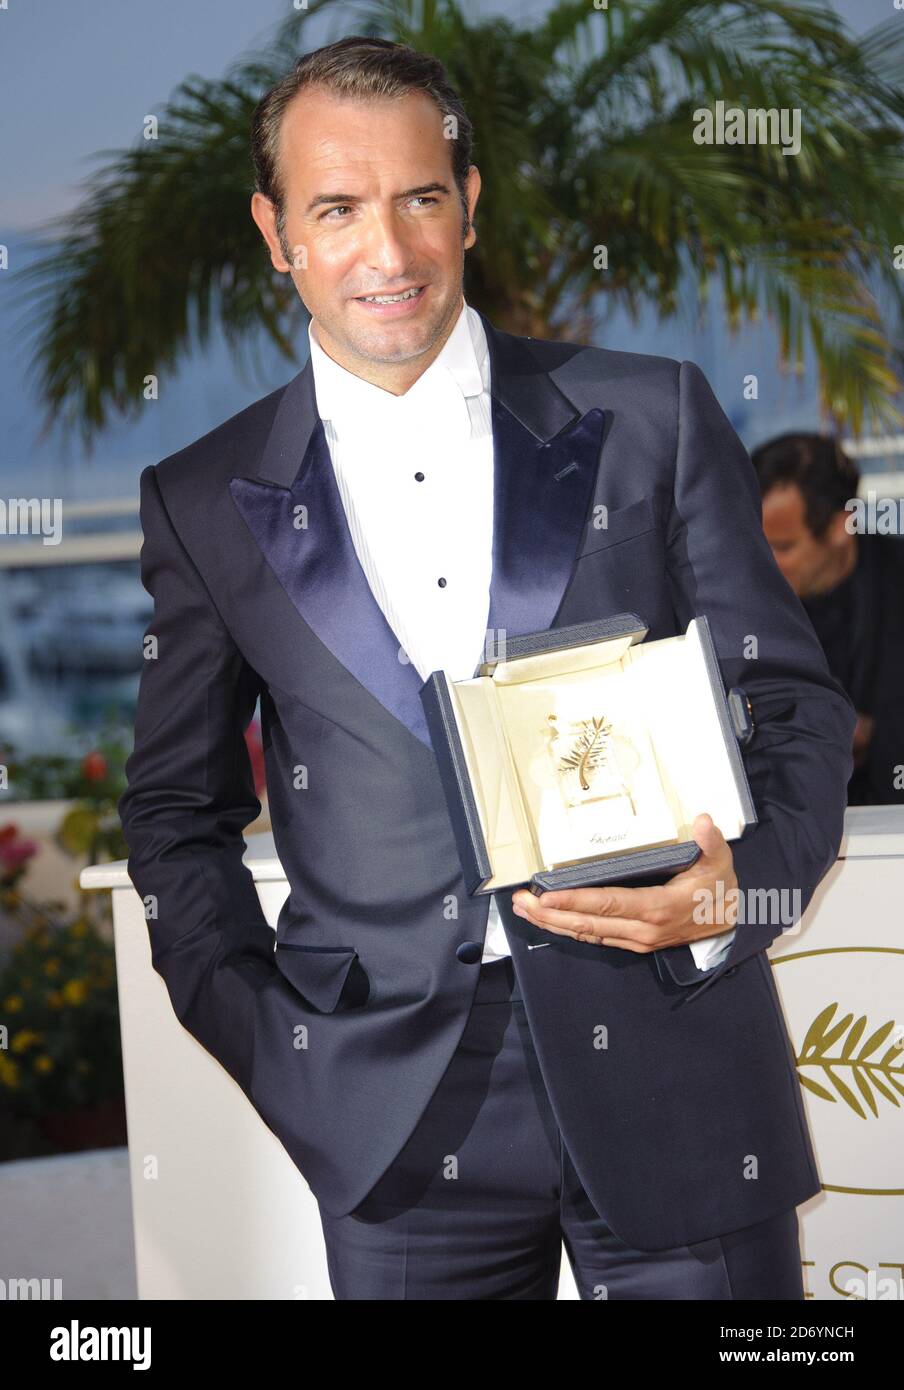 Palme d'Or Ã¢Â€Â“ Best Actor winner Jean Dujardin pictured during an award  winners photocall, during the 64th Cannes International Film Festival, at  the Palais des Festivales in Cannes, France Stock Photo -